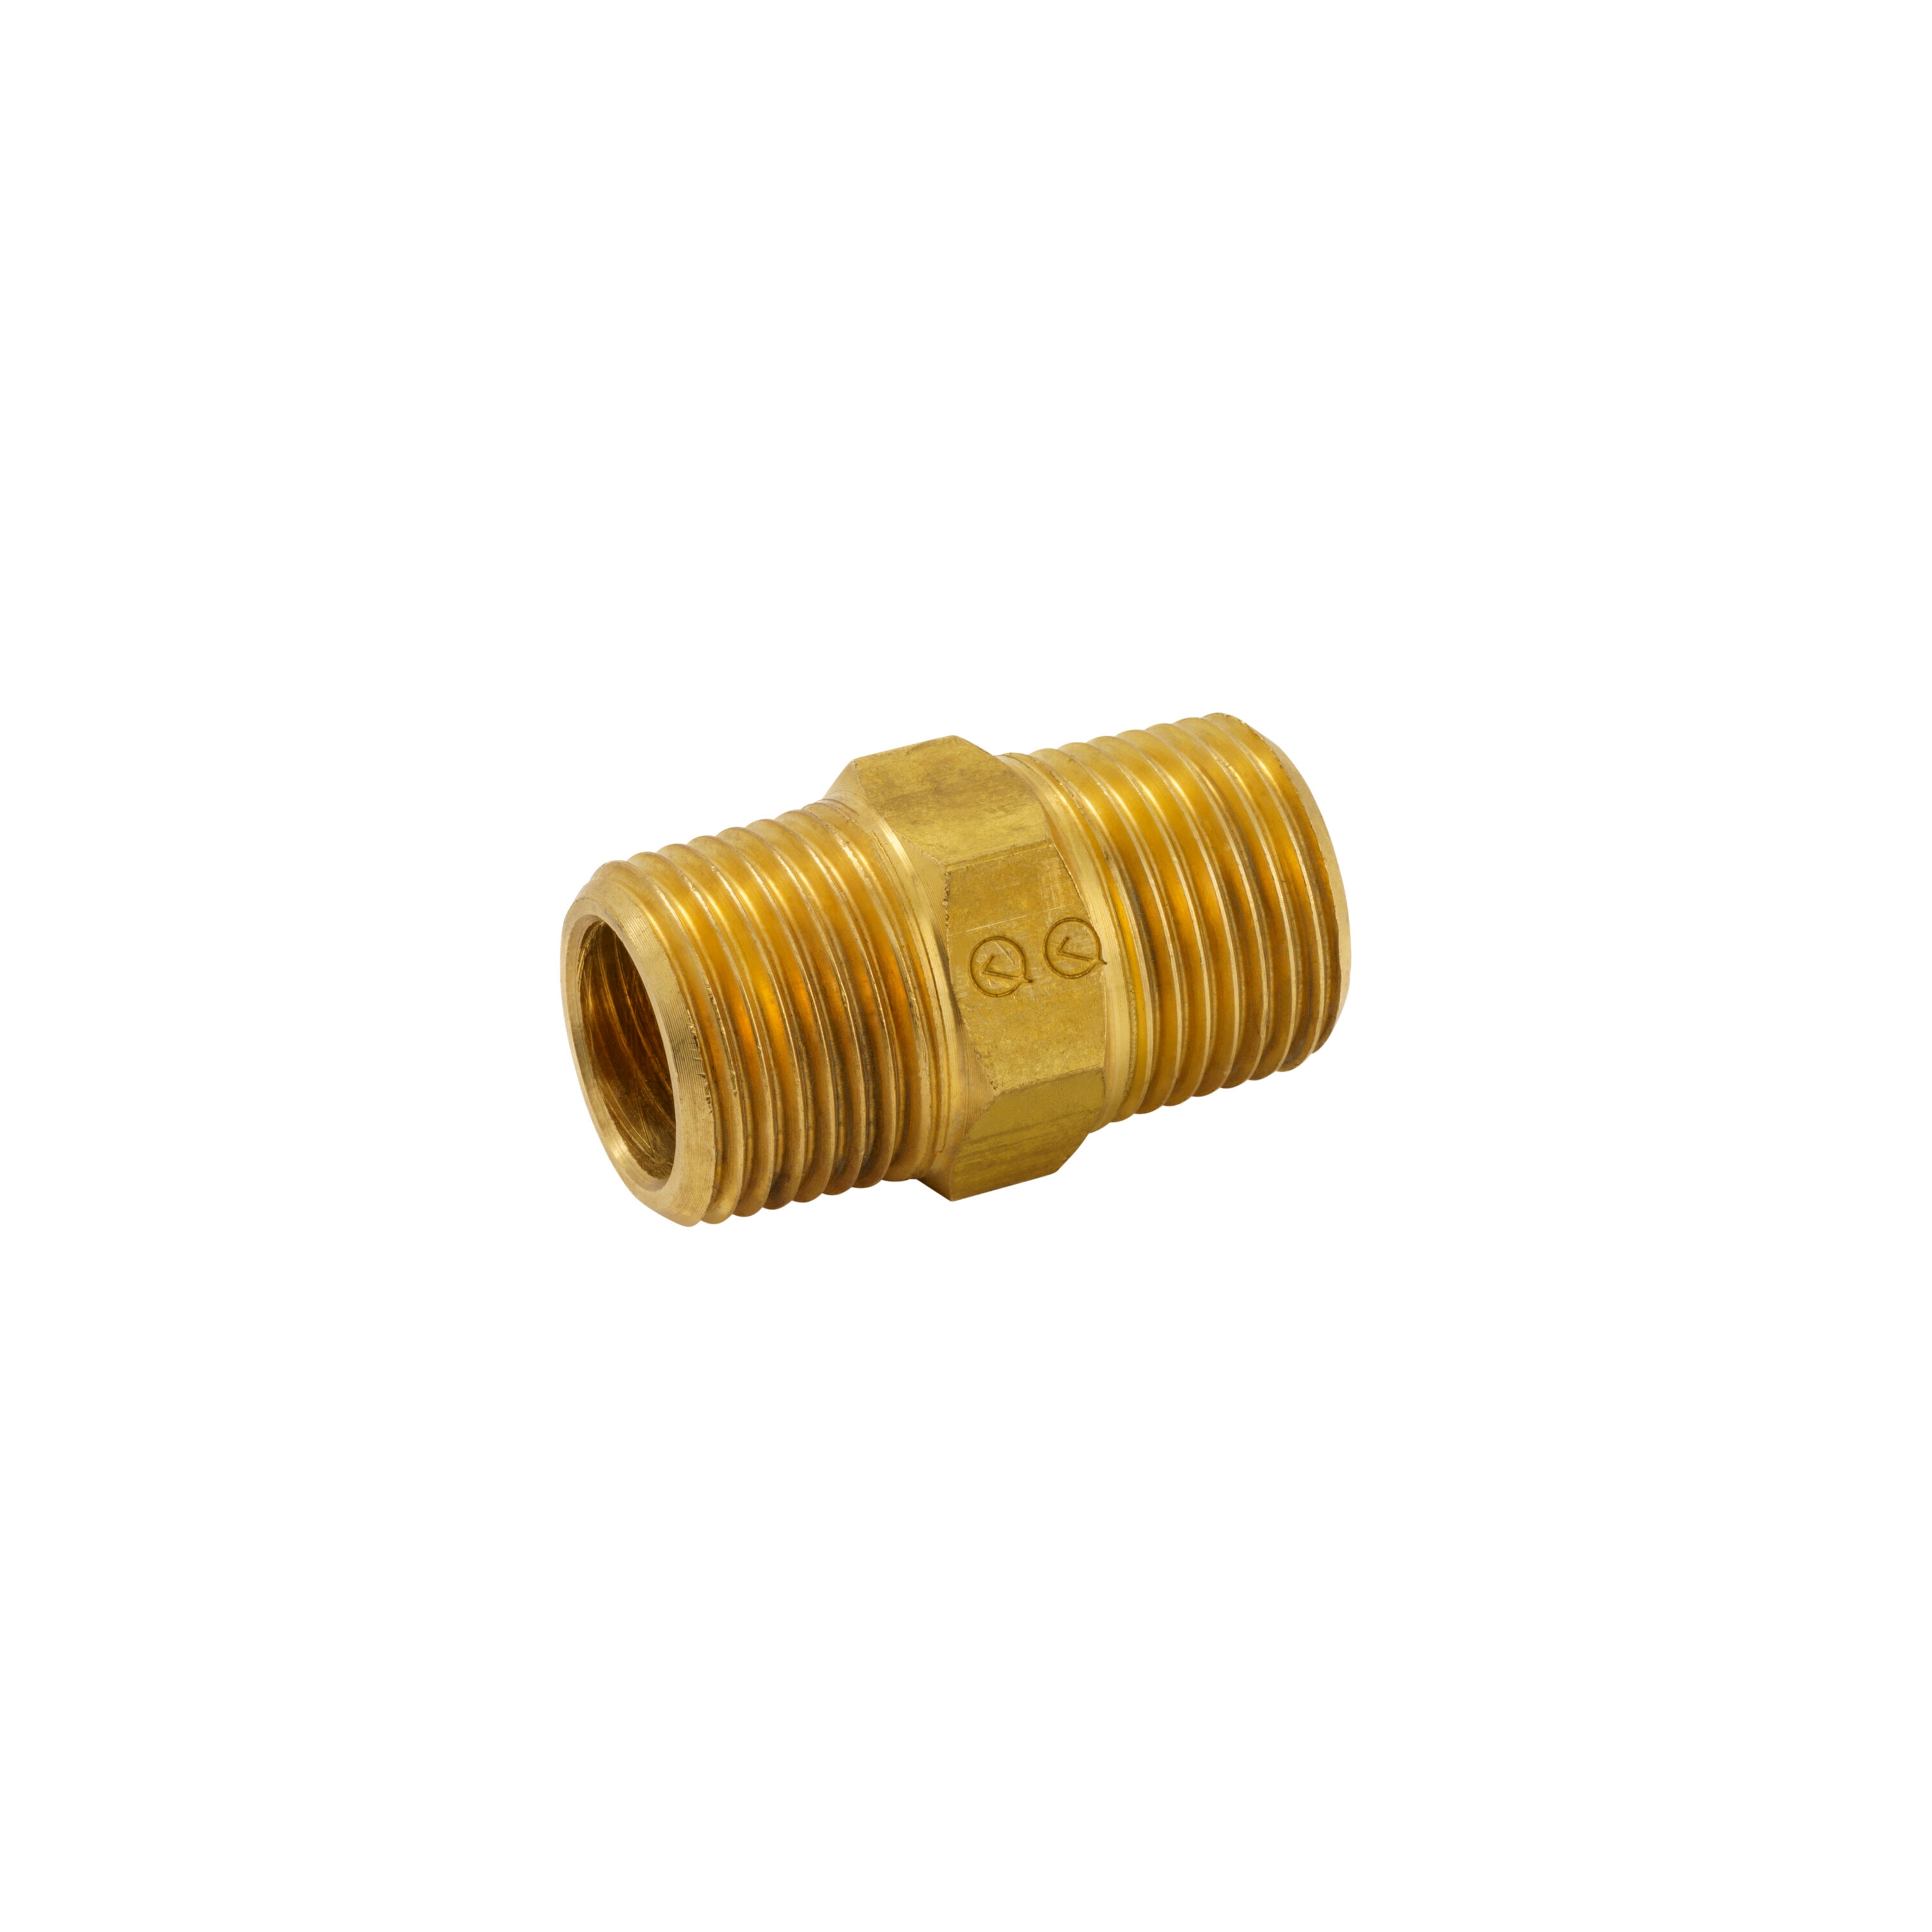 Brass 3/4 Compression Tube Size Nut & Ferrule Sleeve Combo For Pneumatic  Water Plumbing